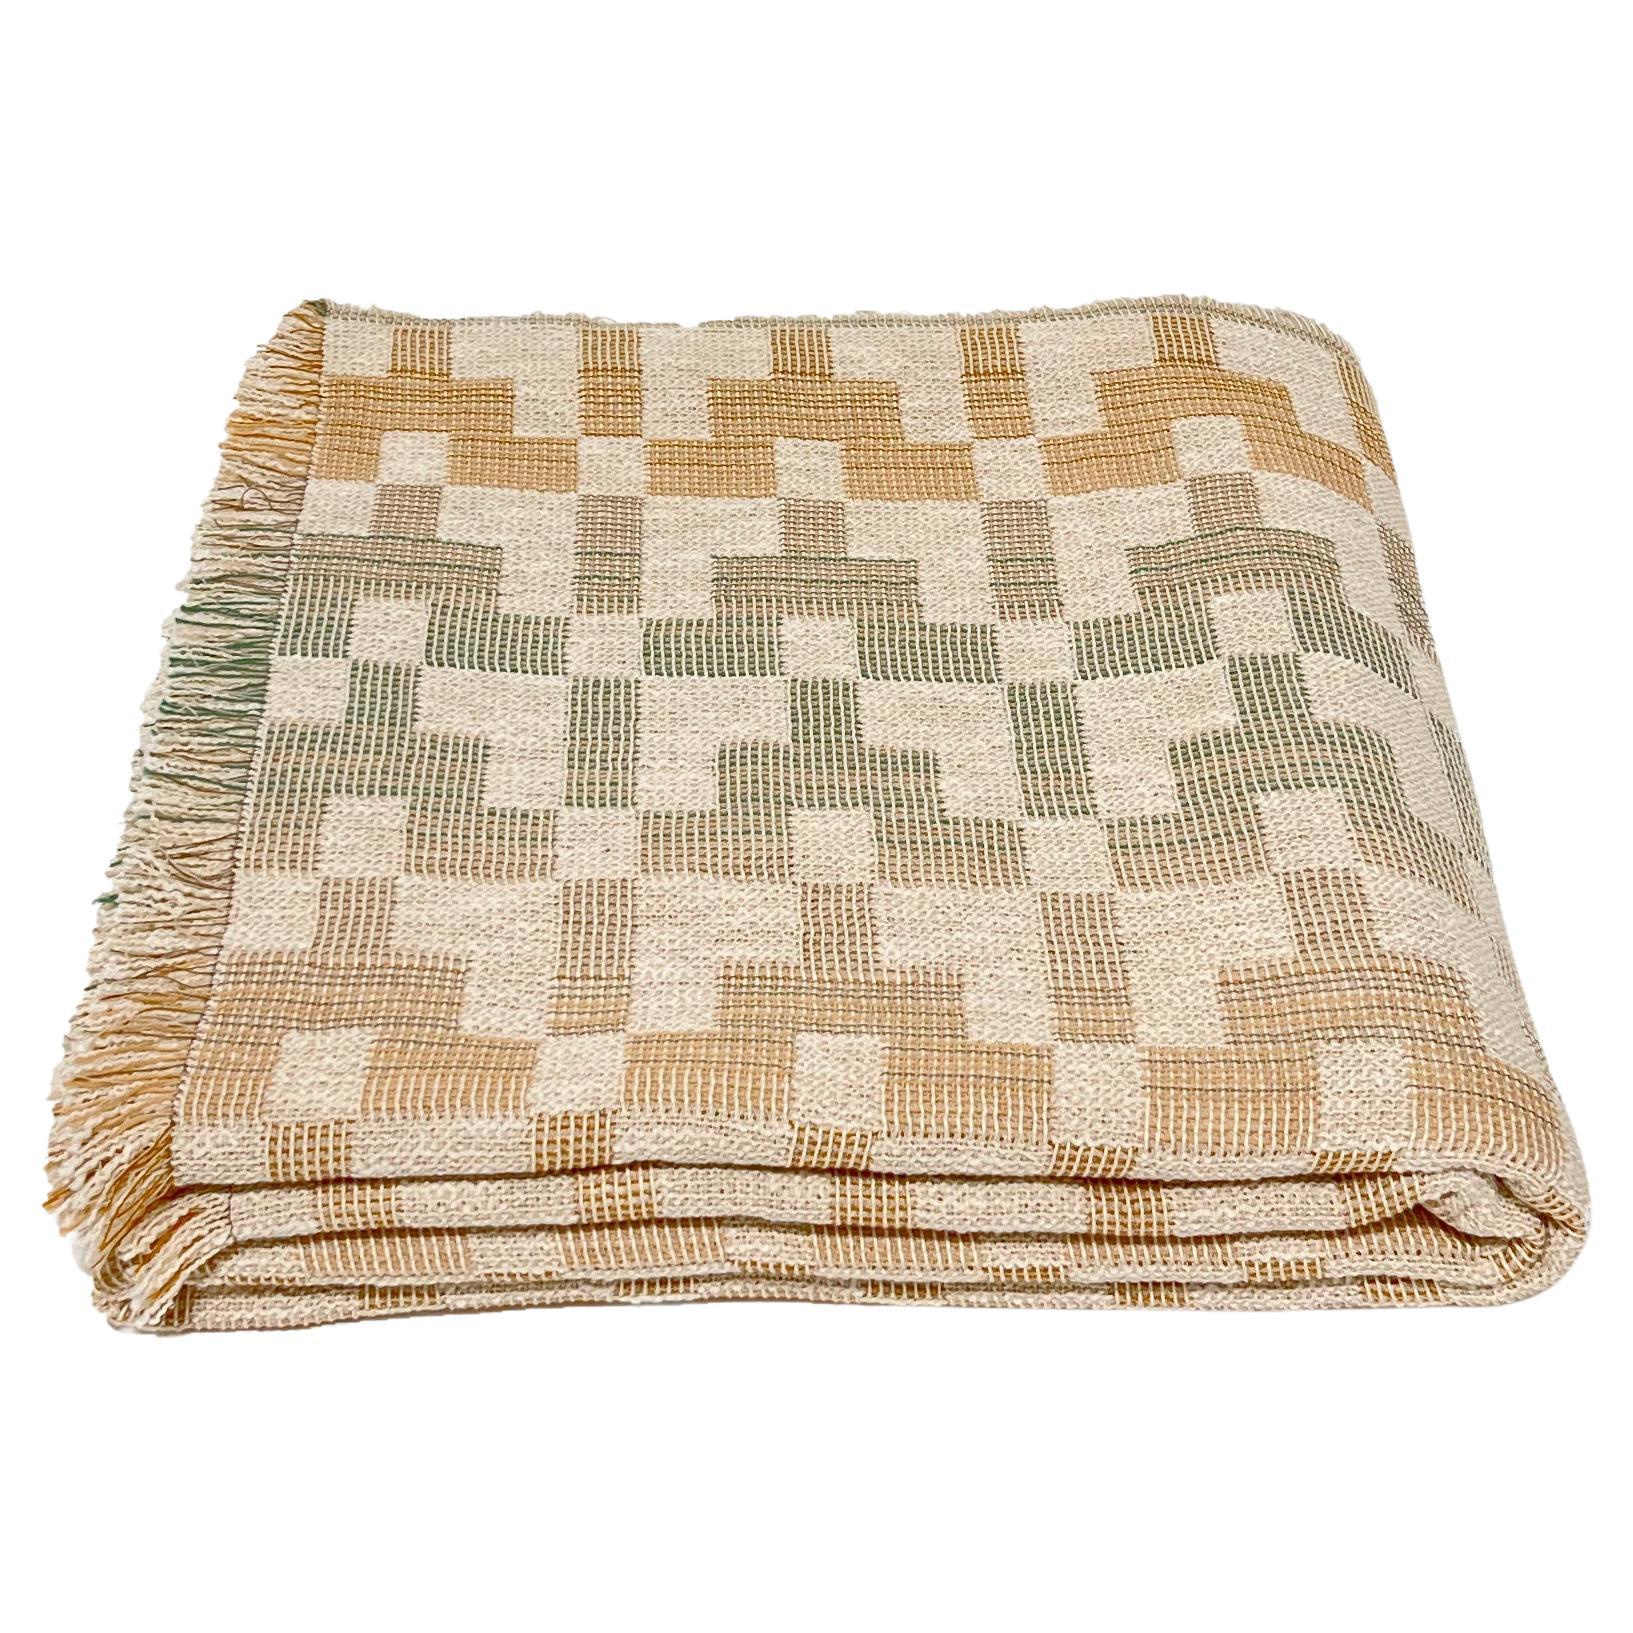 Patterned Woven Cotton Bedspread by Folk Textiles (Esme / Fade)